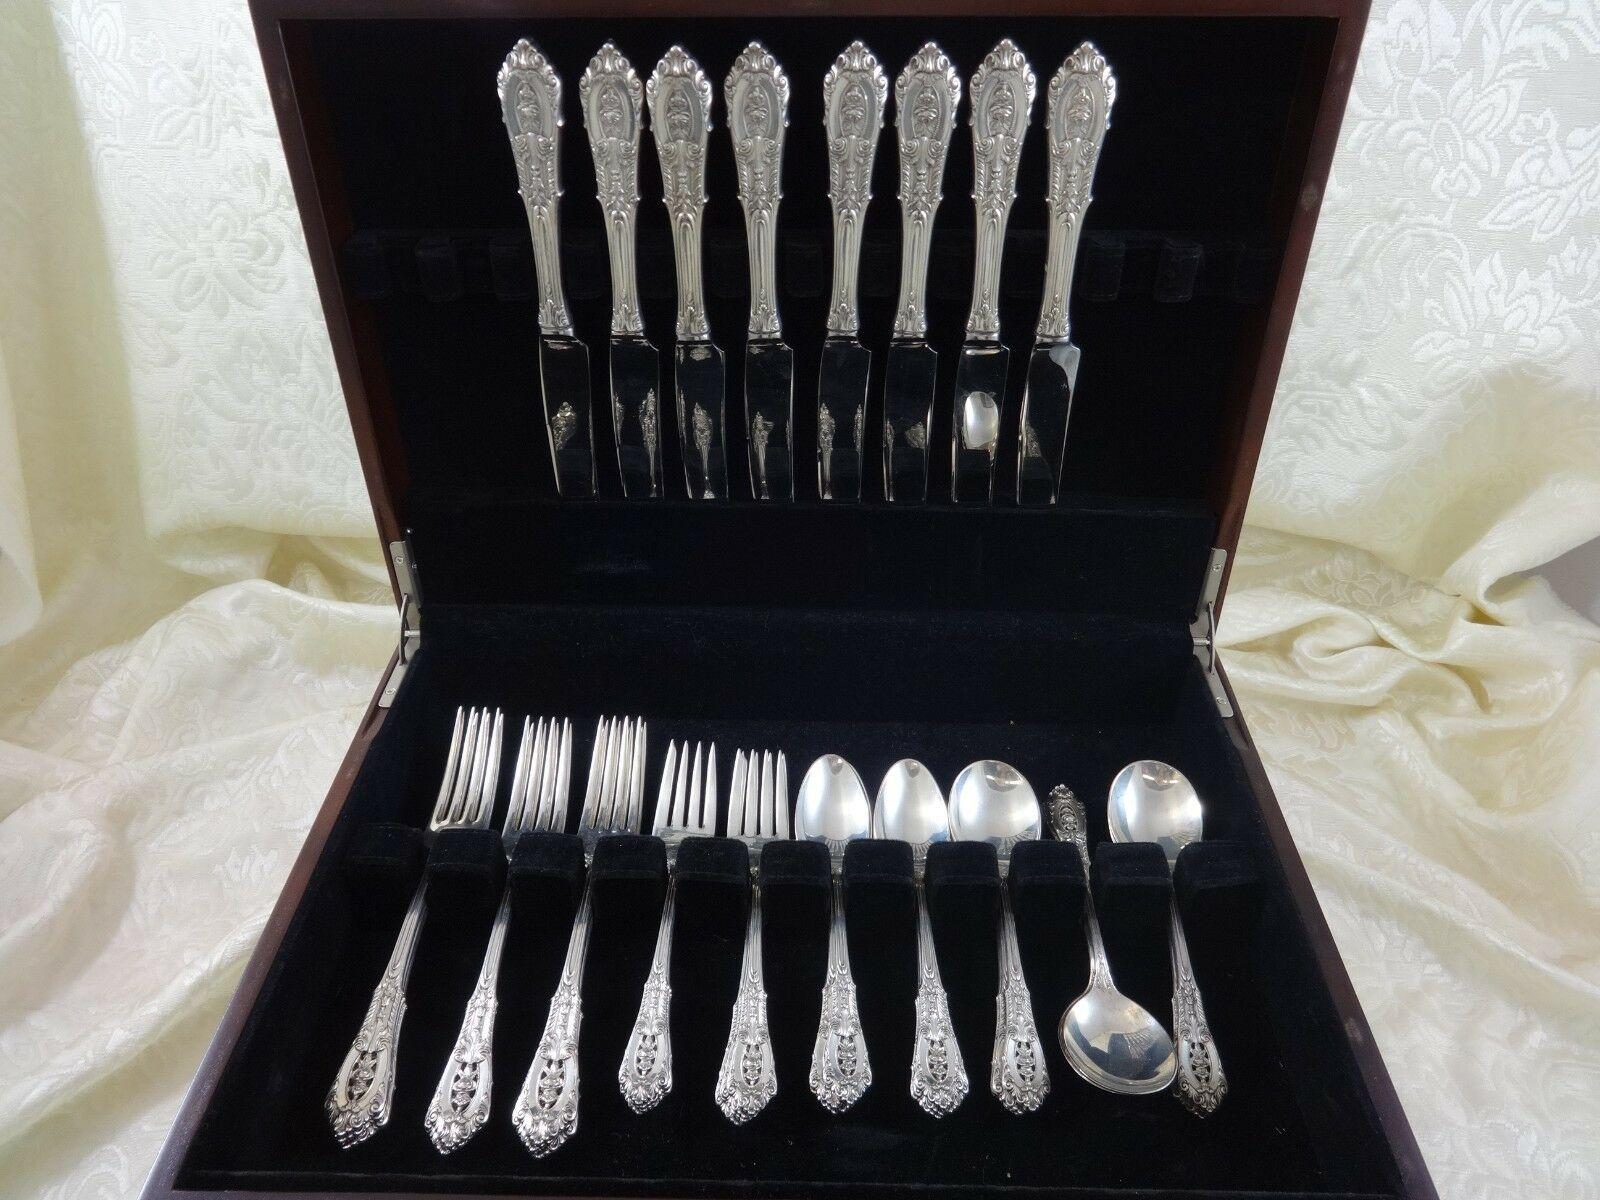 Rose point by Wallace sterling silver dinner size flatware set, 40 pieces. This set includes:

8 dinner size knives, 9 5/8